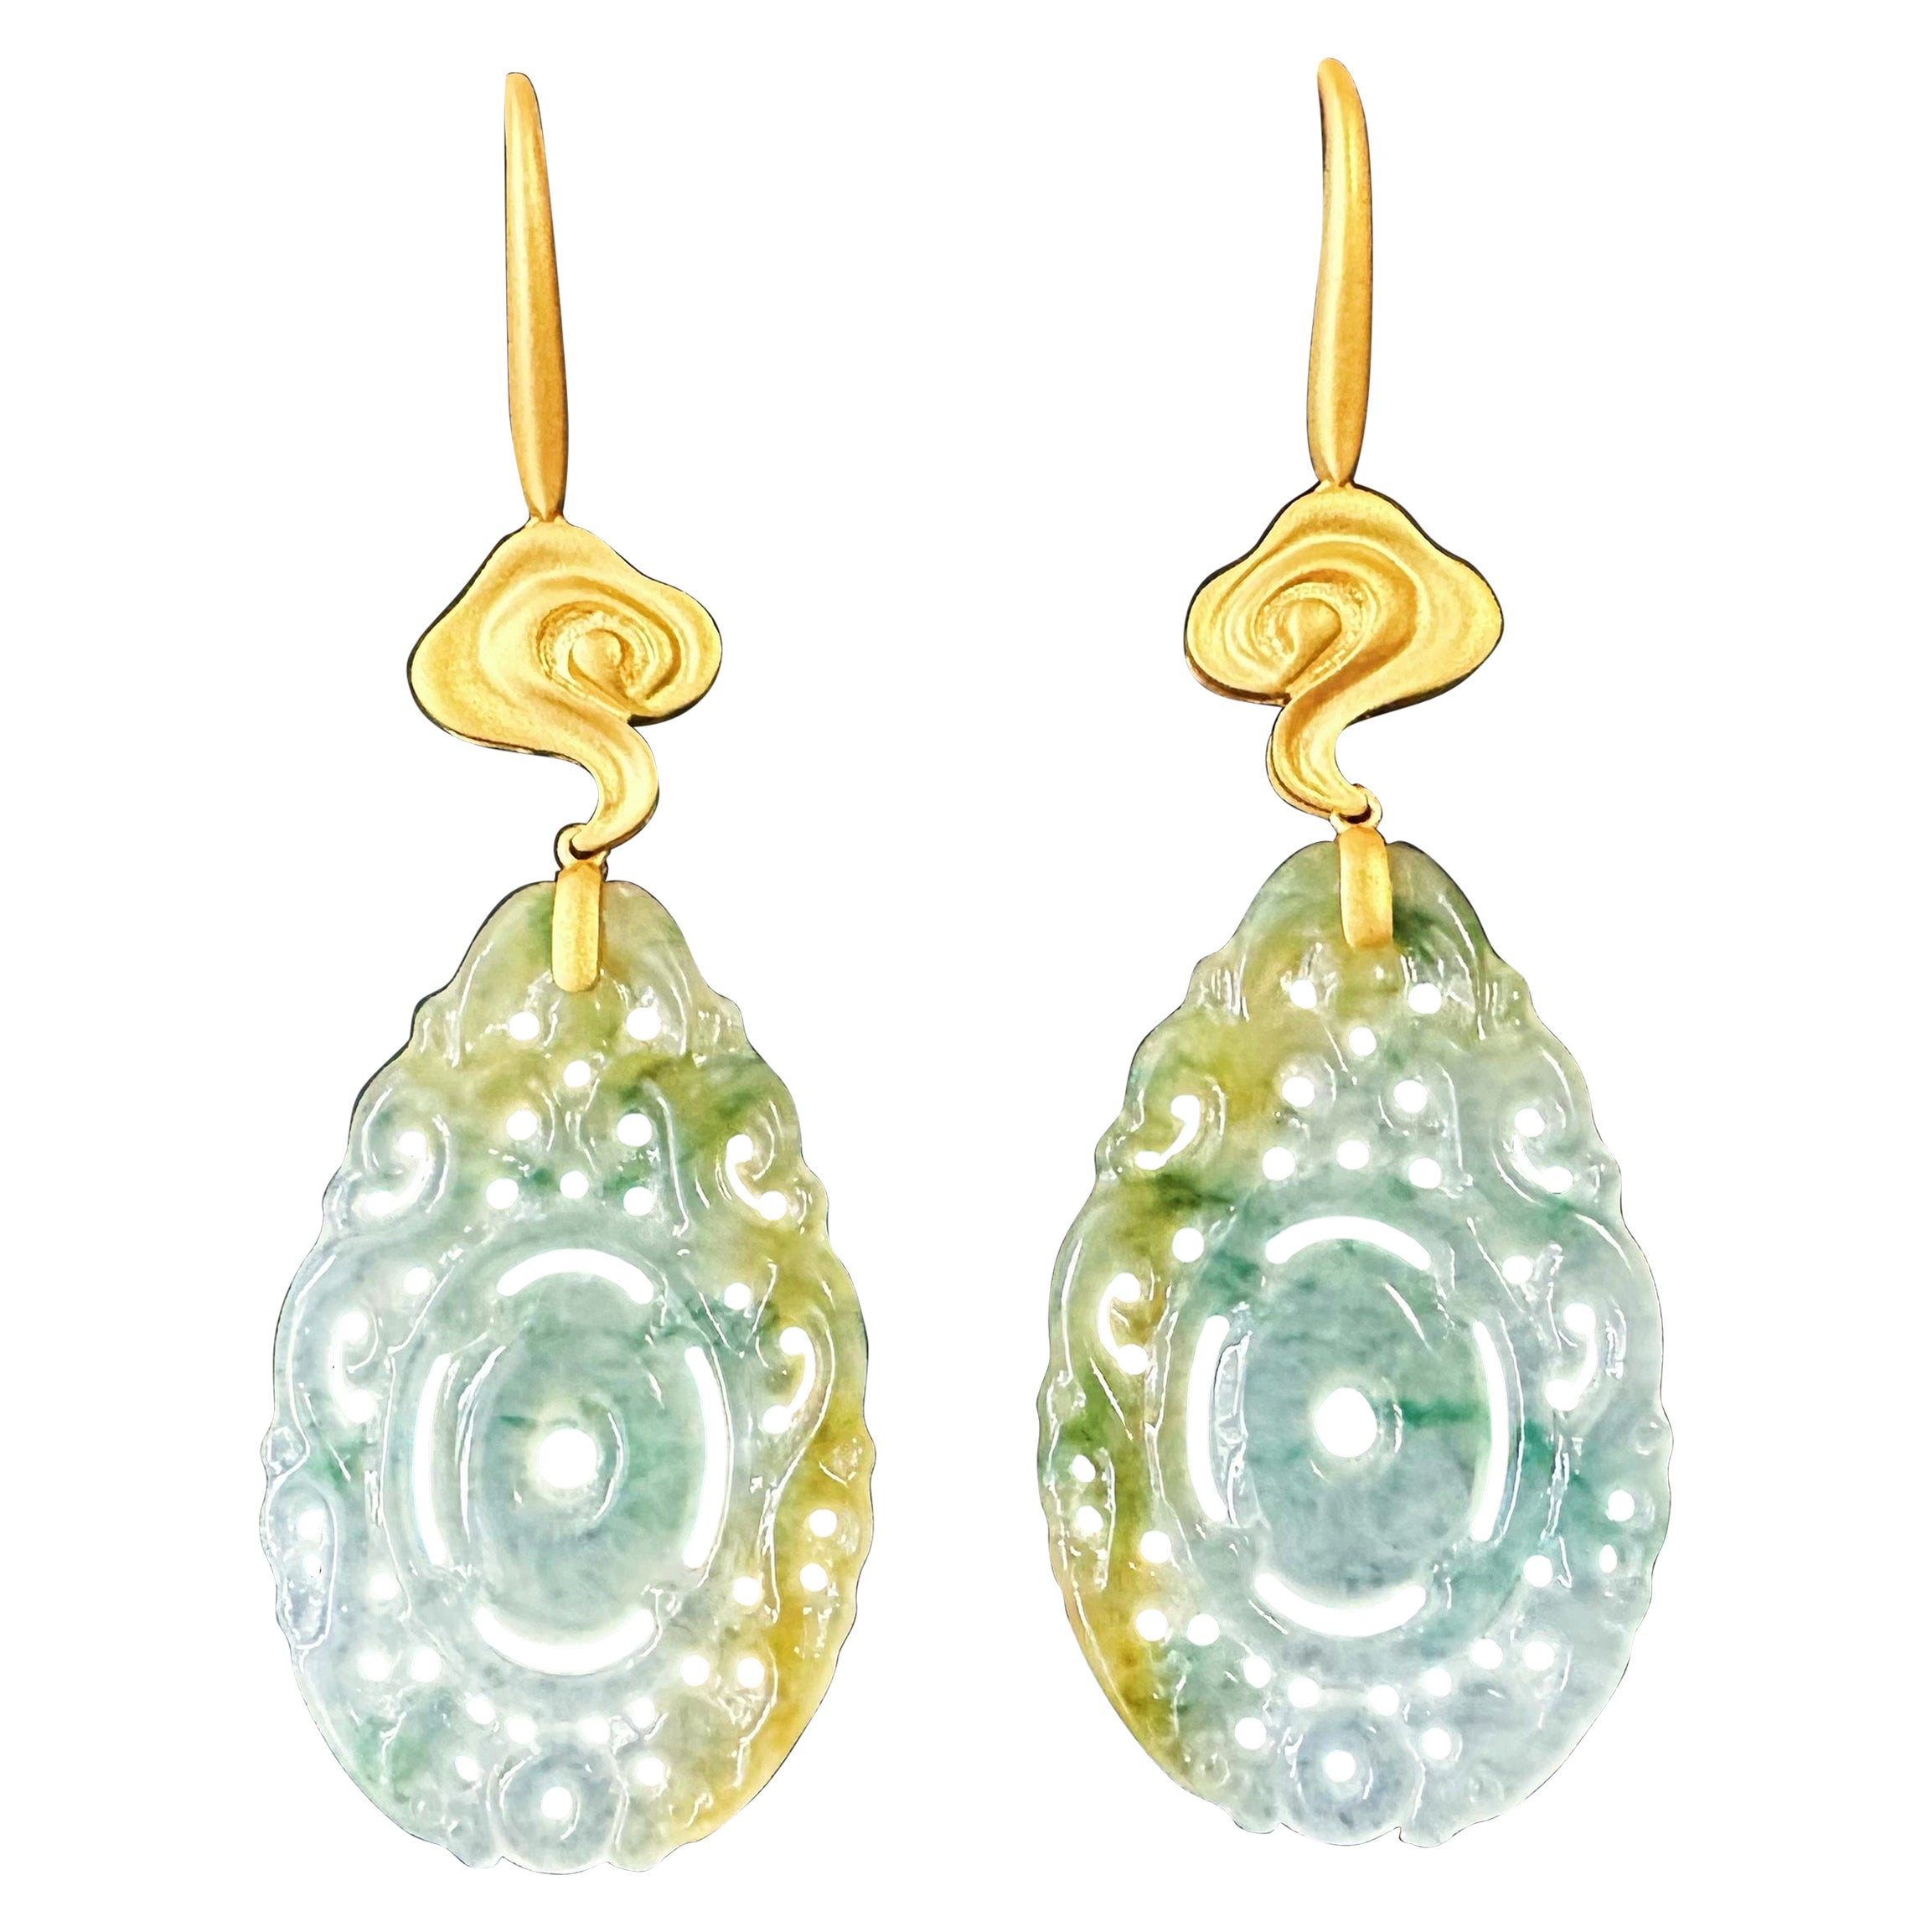 Natural Myanmar Handcrafted Icy Type Bicolor Green and Yellow Jade Earrings